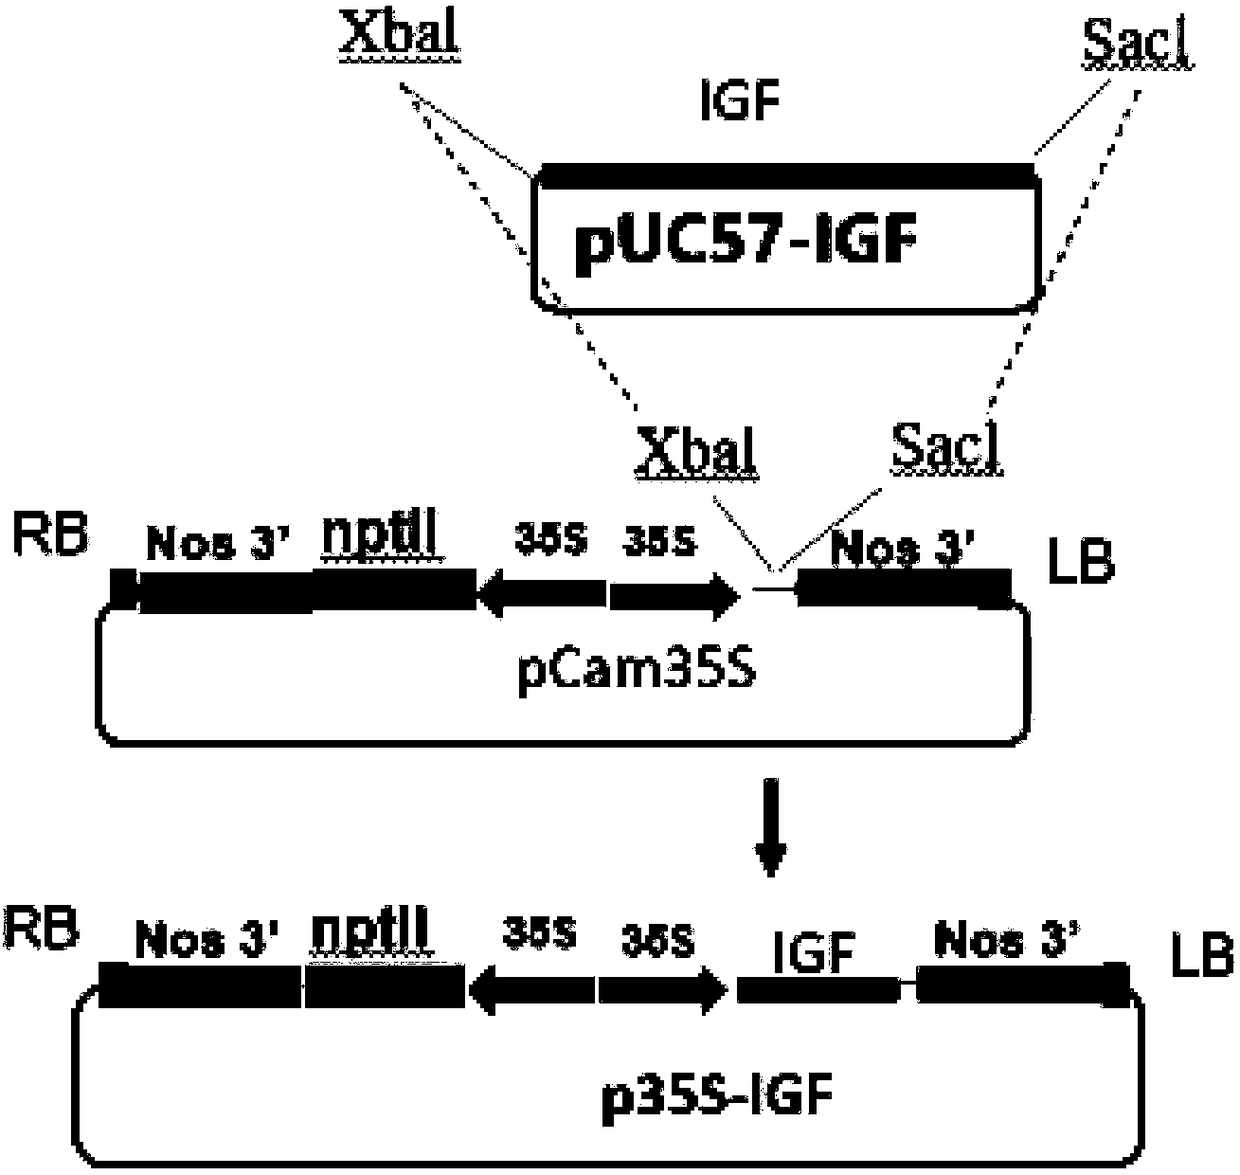 Application of plant serving as host in expressing insulin-like growth factor